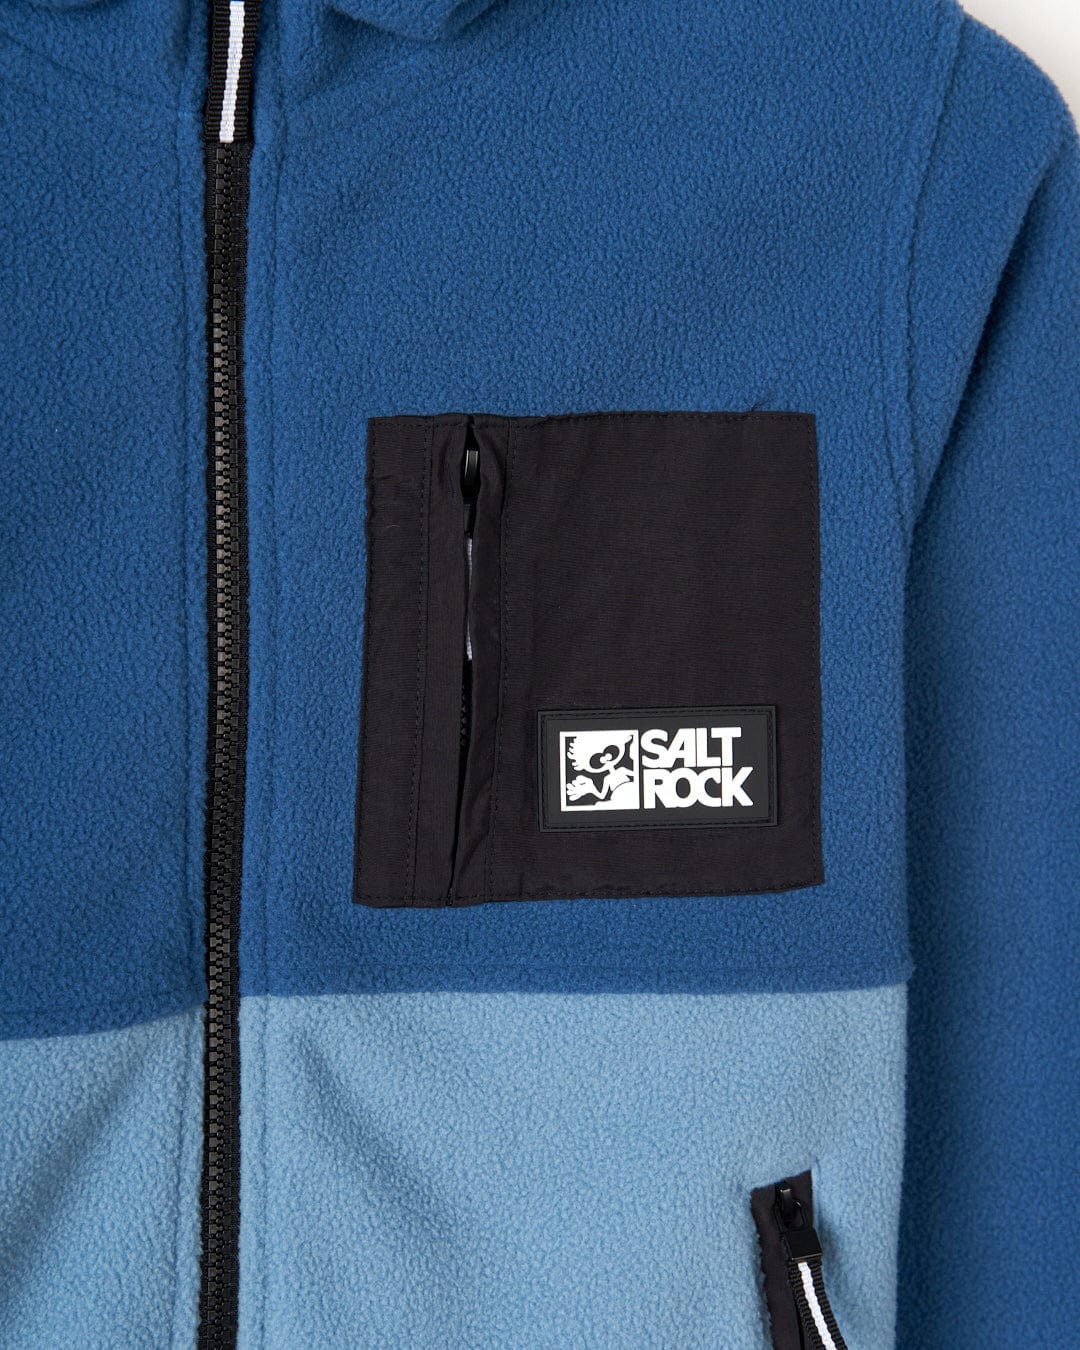 A Saltrock blue Re-Issue - Kids Fleece hoodie with a logo on it and zip pockets.